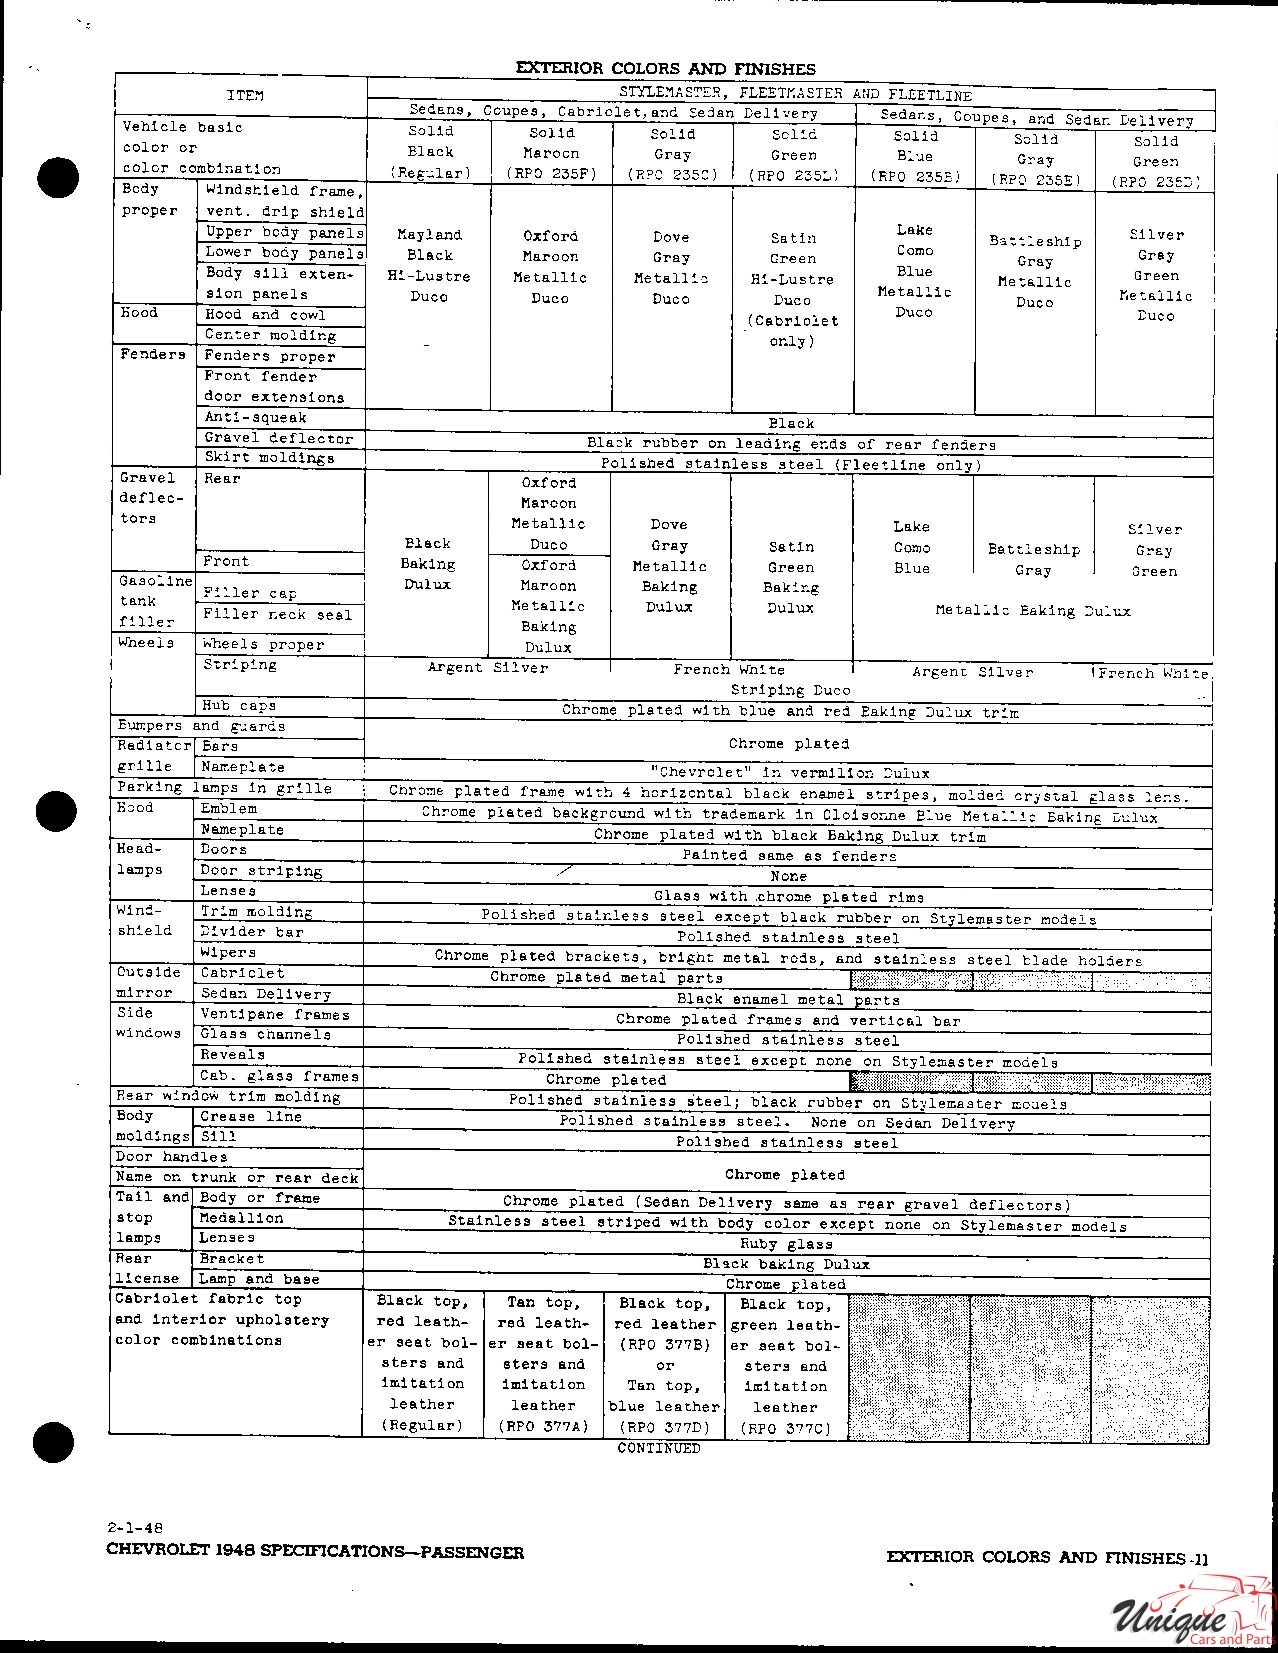 1948 Chevrolet Specifications Page 2